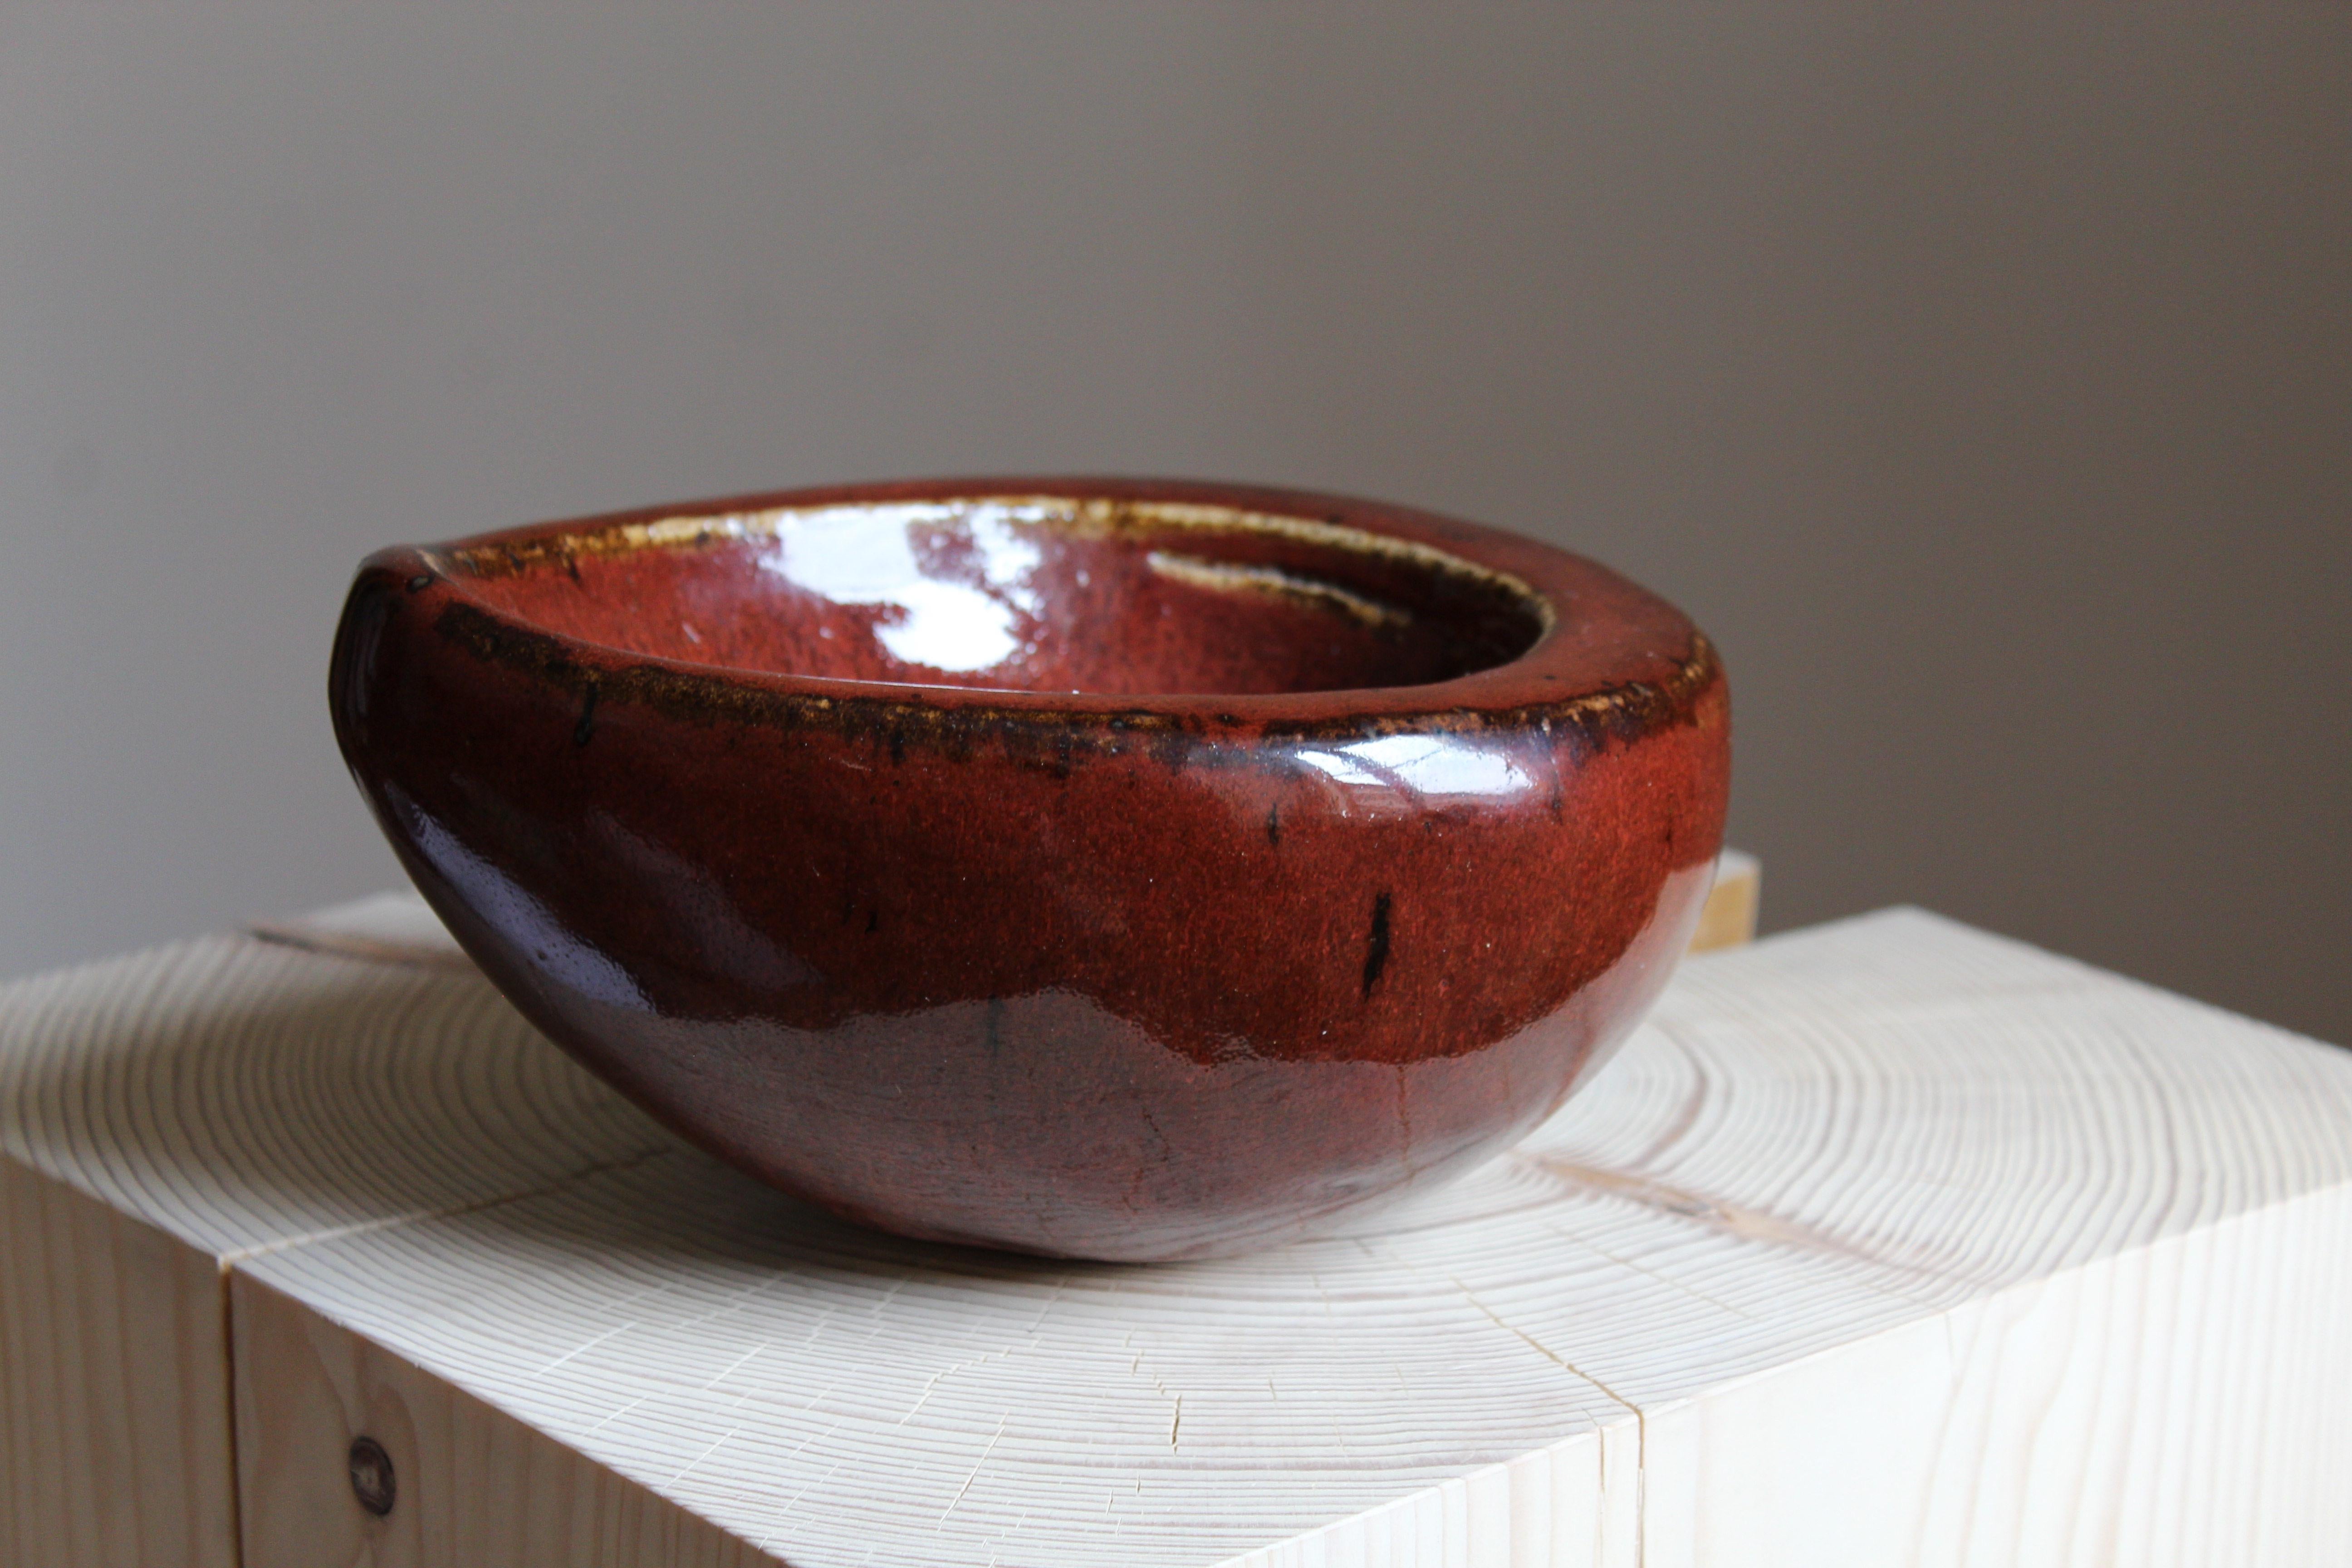 An organic bowl. Designed by Agnete Jørgensen for Bing & Grondahl, Denmark, 1960s. Stamped.

Features oxblood glazed stoneware. 

Other designers of the period include Axel Salto, Arne Bang, Carl-Harry Stålhane, Hans Cooper, and Lucie Rie.